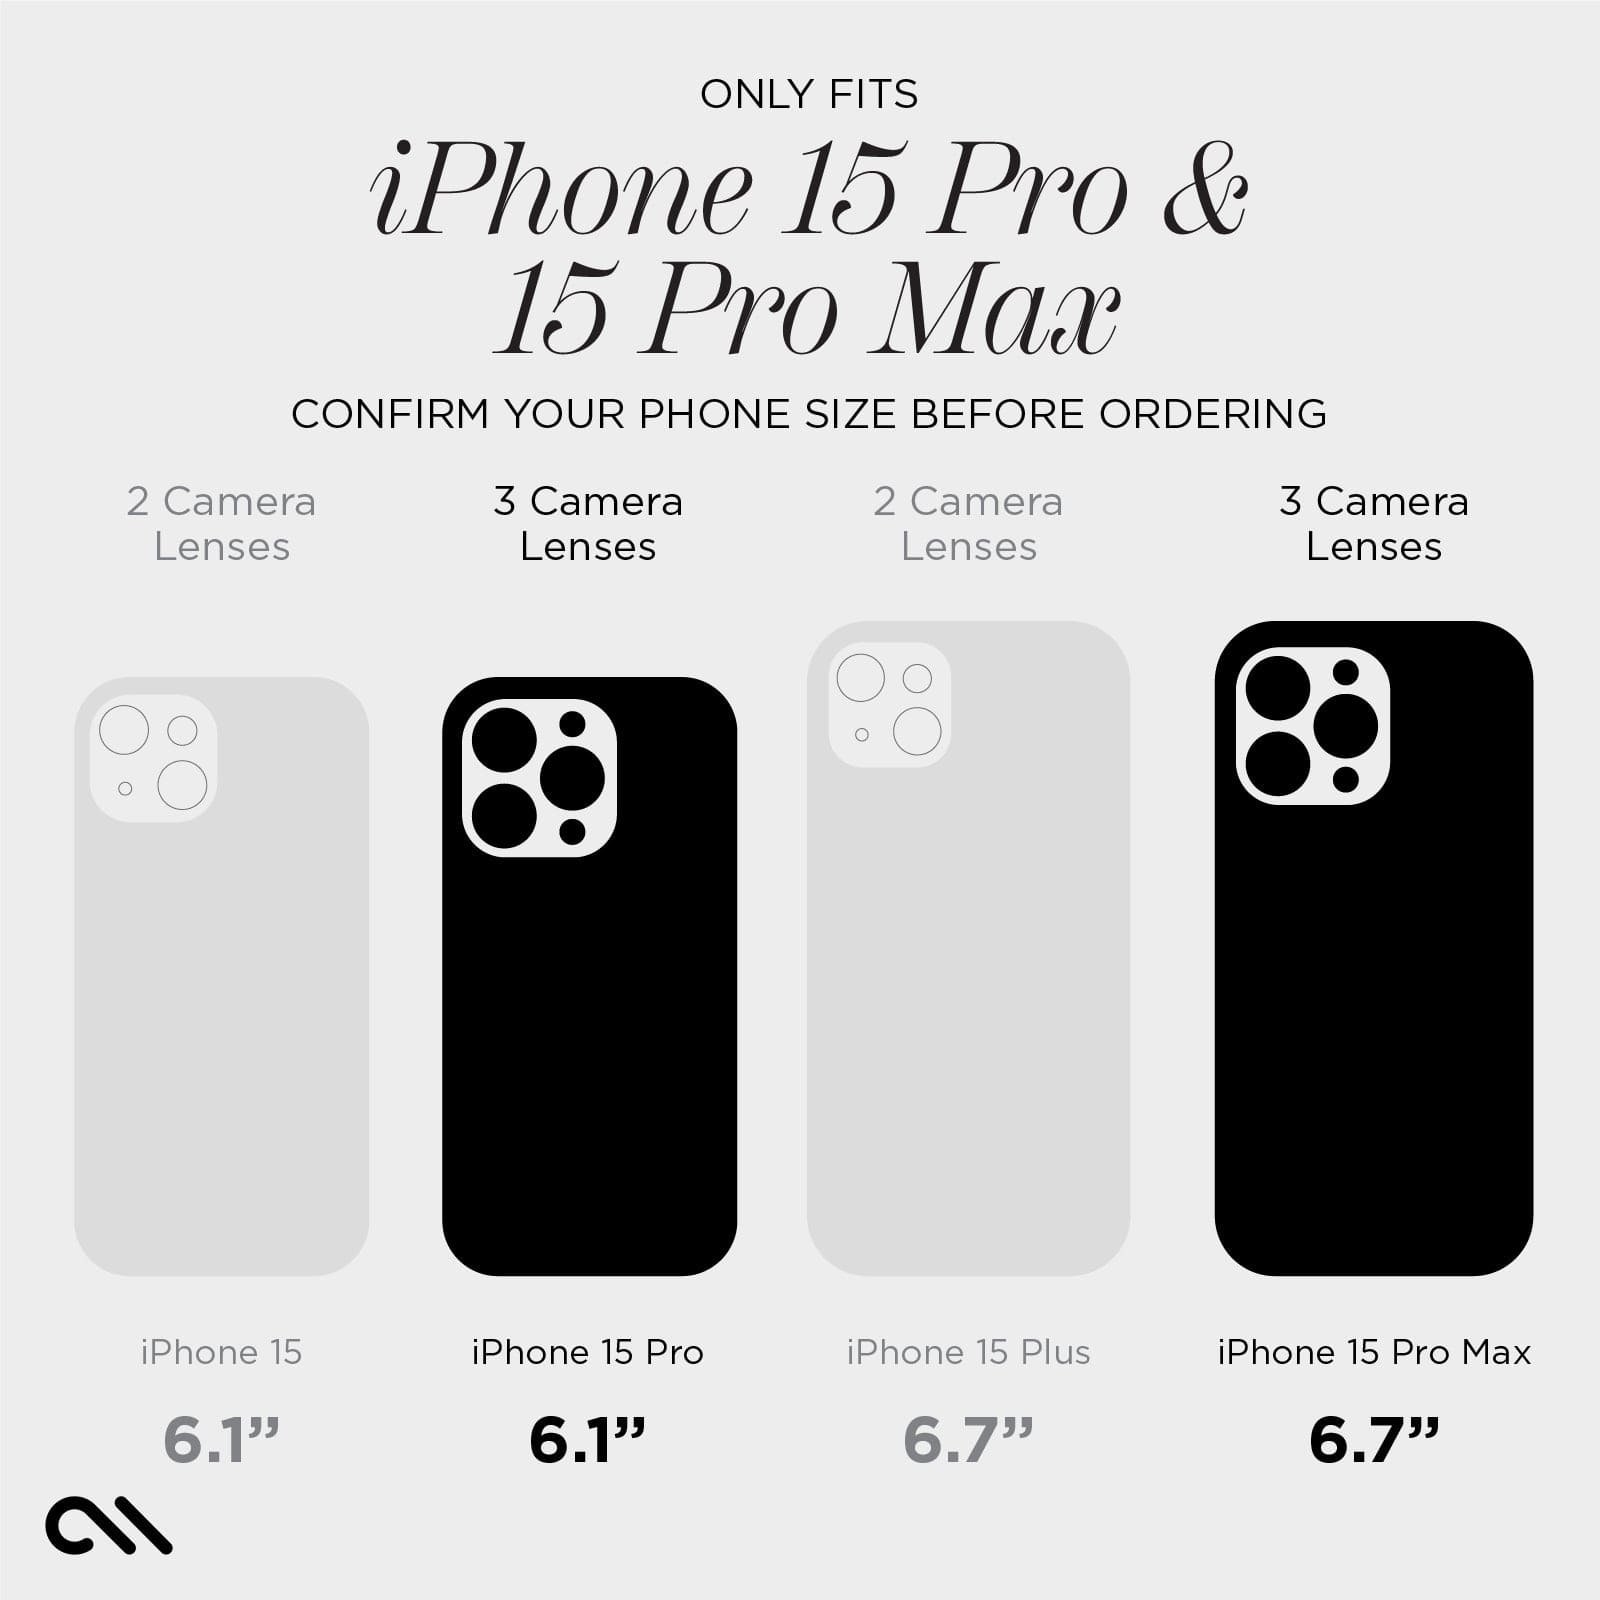 ONLY FITS IPHONE 15 PRO & IPHONE 15 PRO MAX